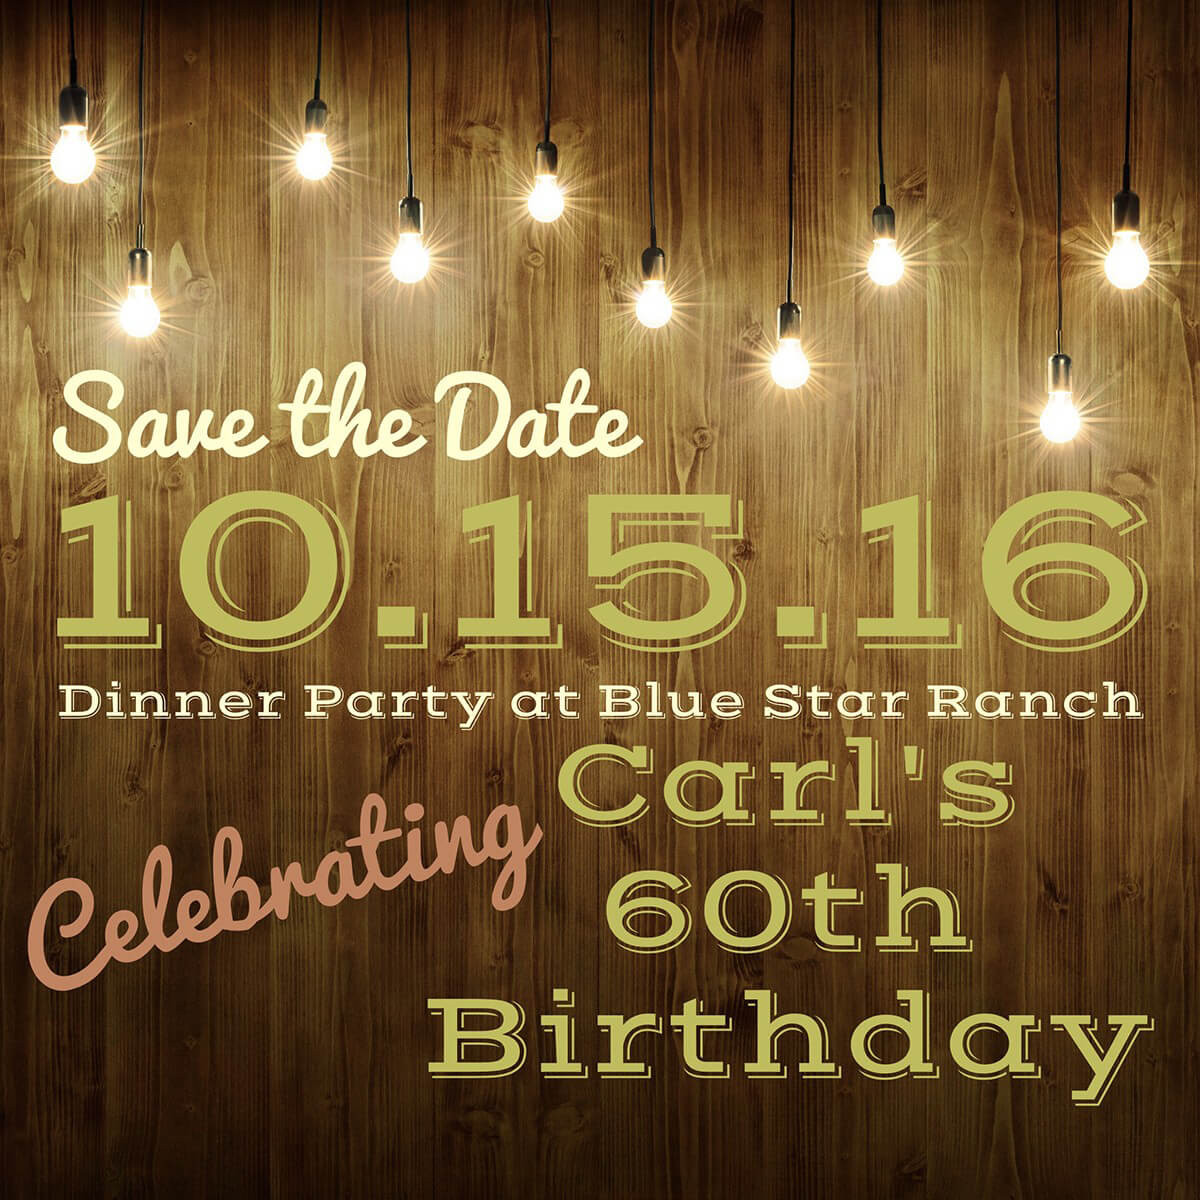 Making Birthday Invitations Online
 Make Your Own Birthday Invitations for Free